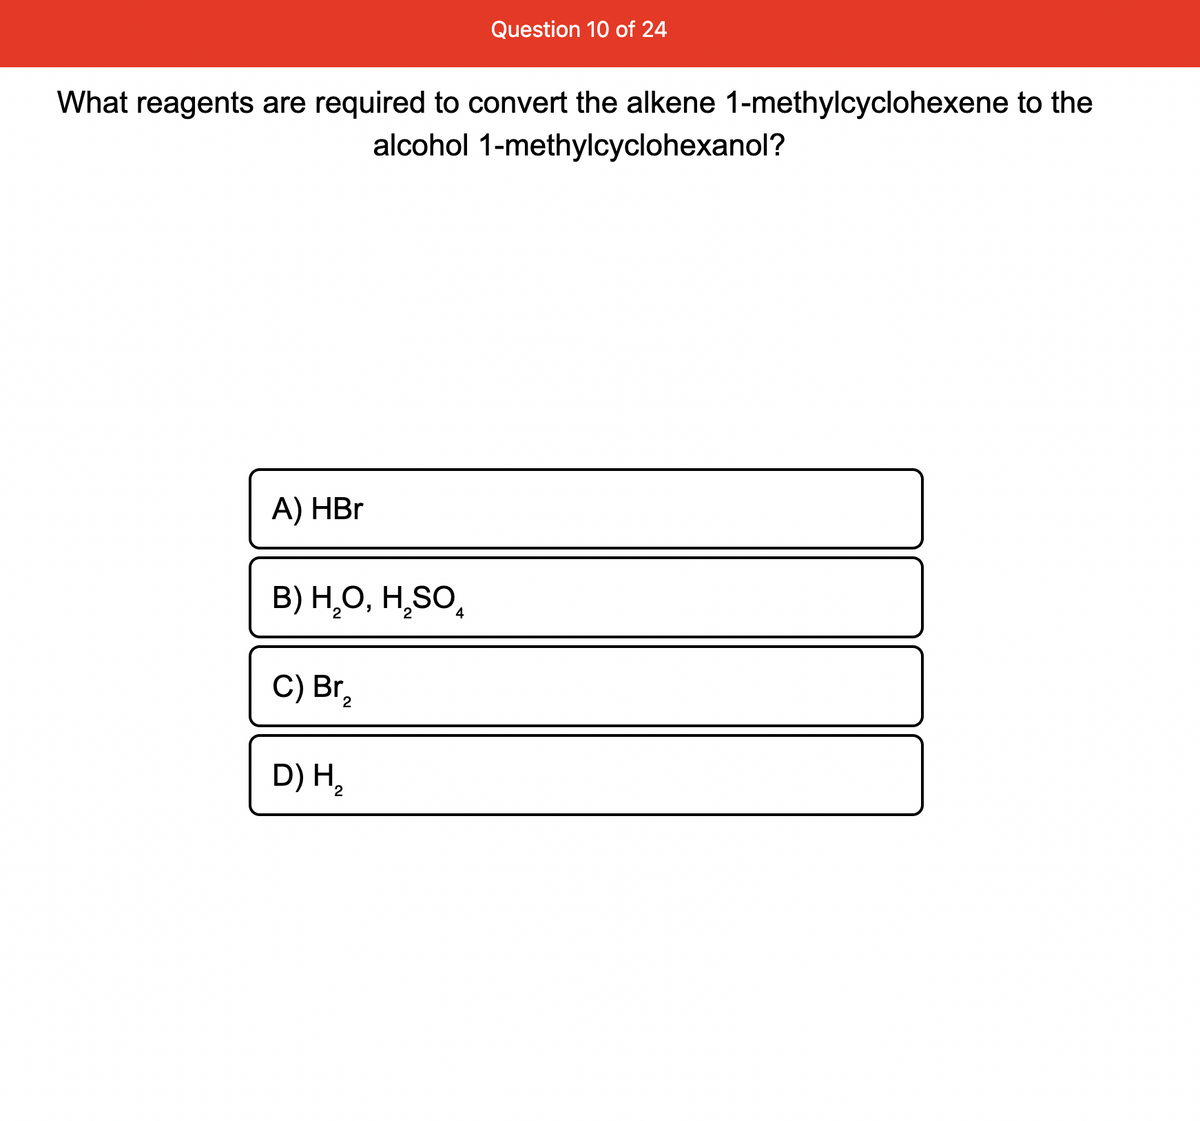 What reagents are required to convert the alkene 1-methylcyclohexene to the
alcohol 1-methylcyclohexanol?
A) HBr
B) H₂O, H₂SO4
C) Br
2
Question 10 of 24
D) H₂